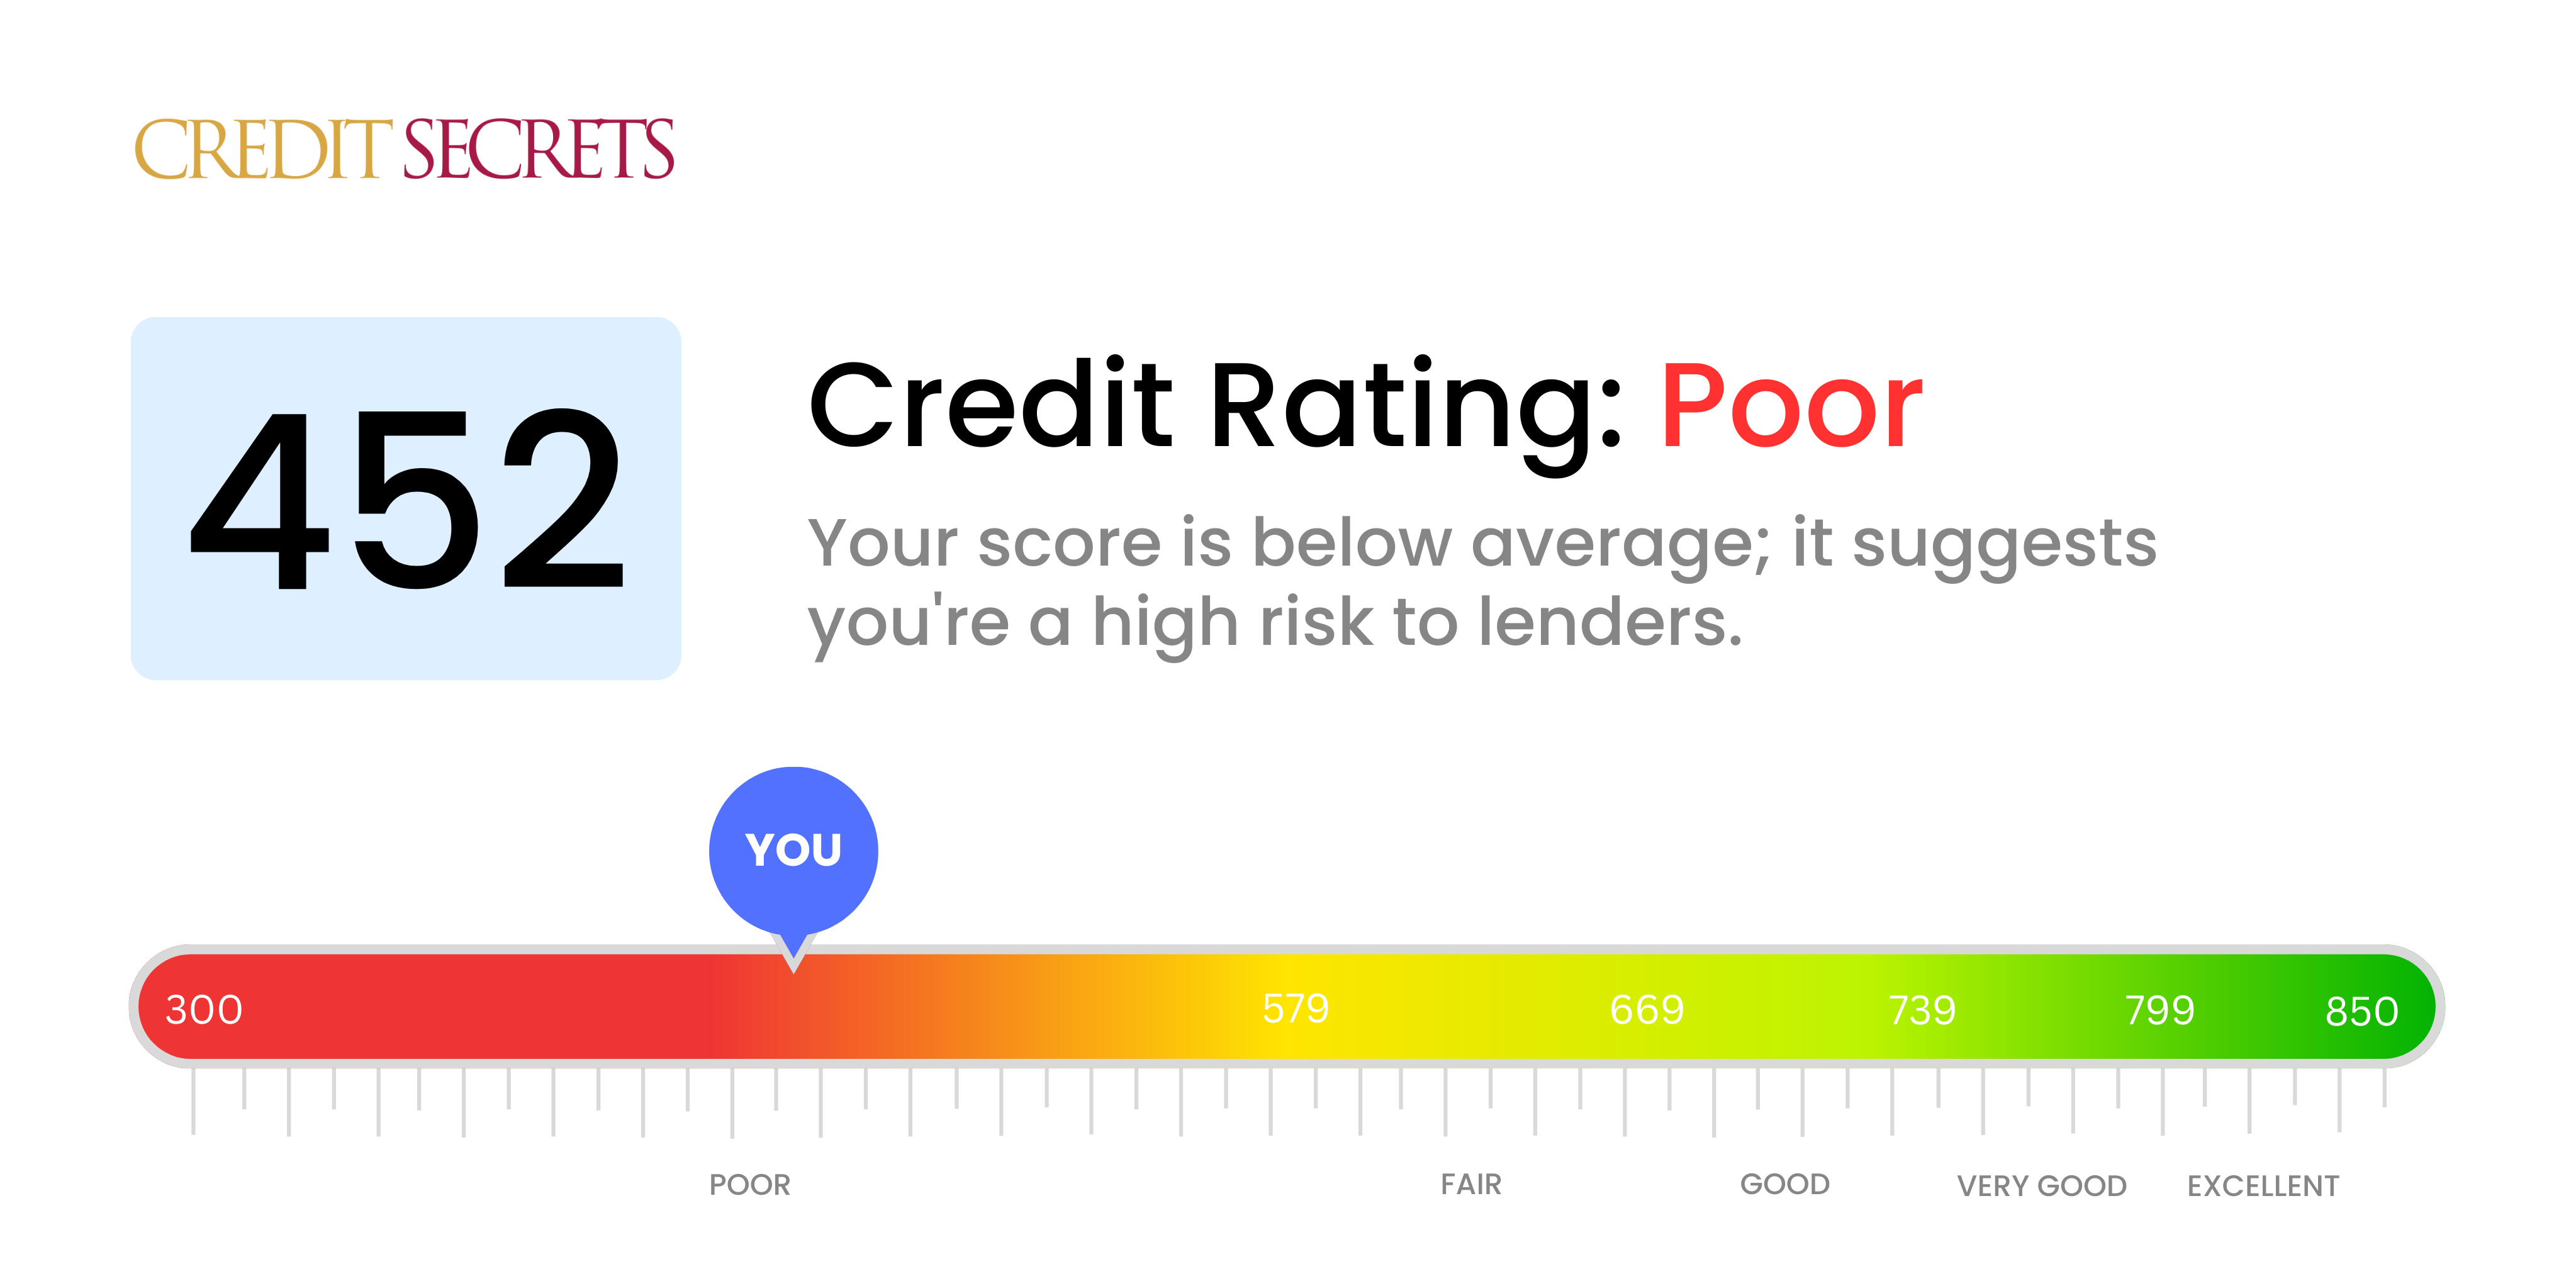 Is 452 a good credit score?